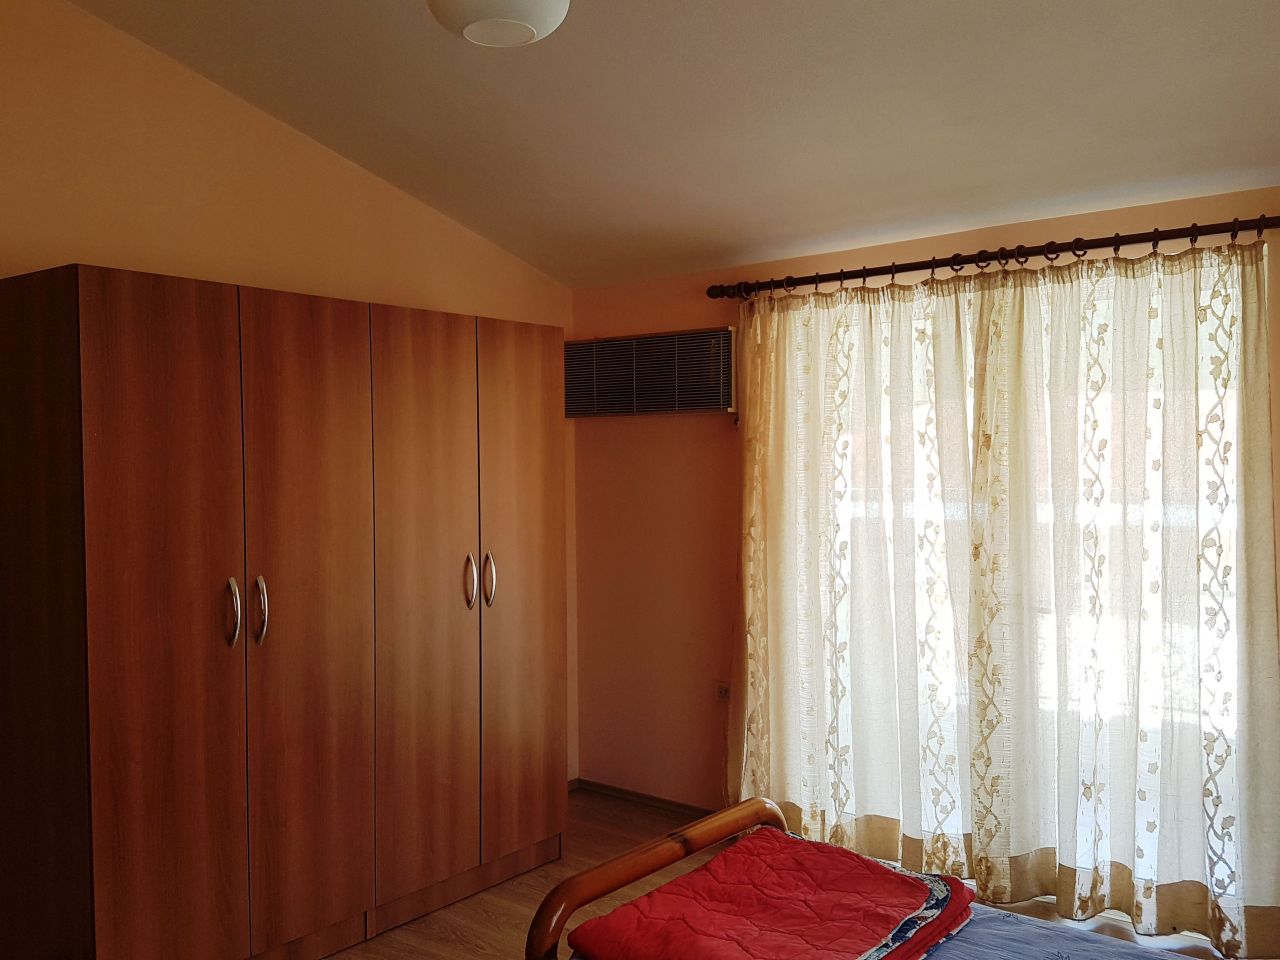 Two bedroom apartment for rent in Tirana within 10 minutes drive from Tirana center.